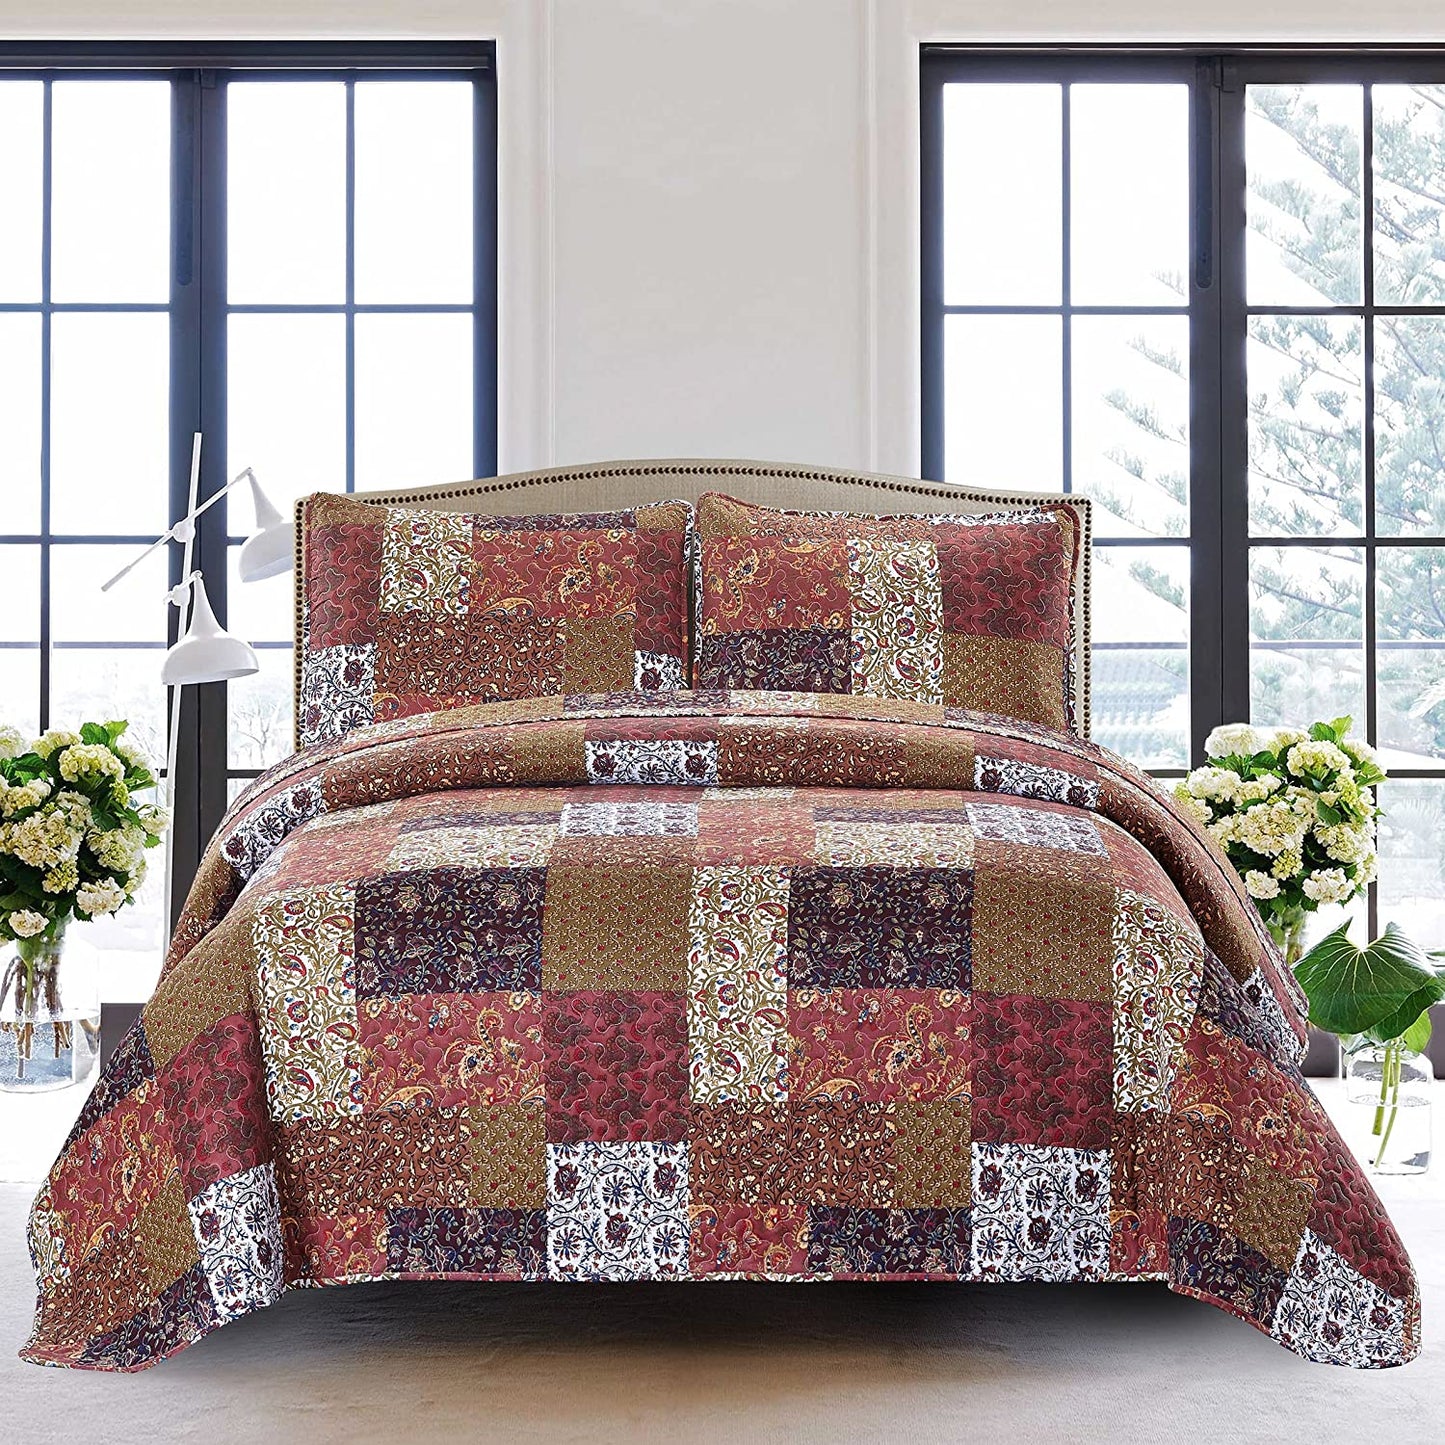 Pure Cotton Red Riches Lightweight Quilted Bedspread 3 Pieces Quilt Set with 2 Pillowcases